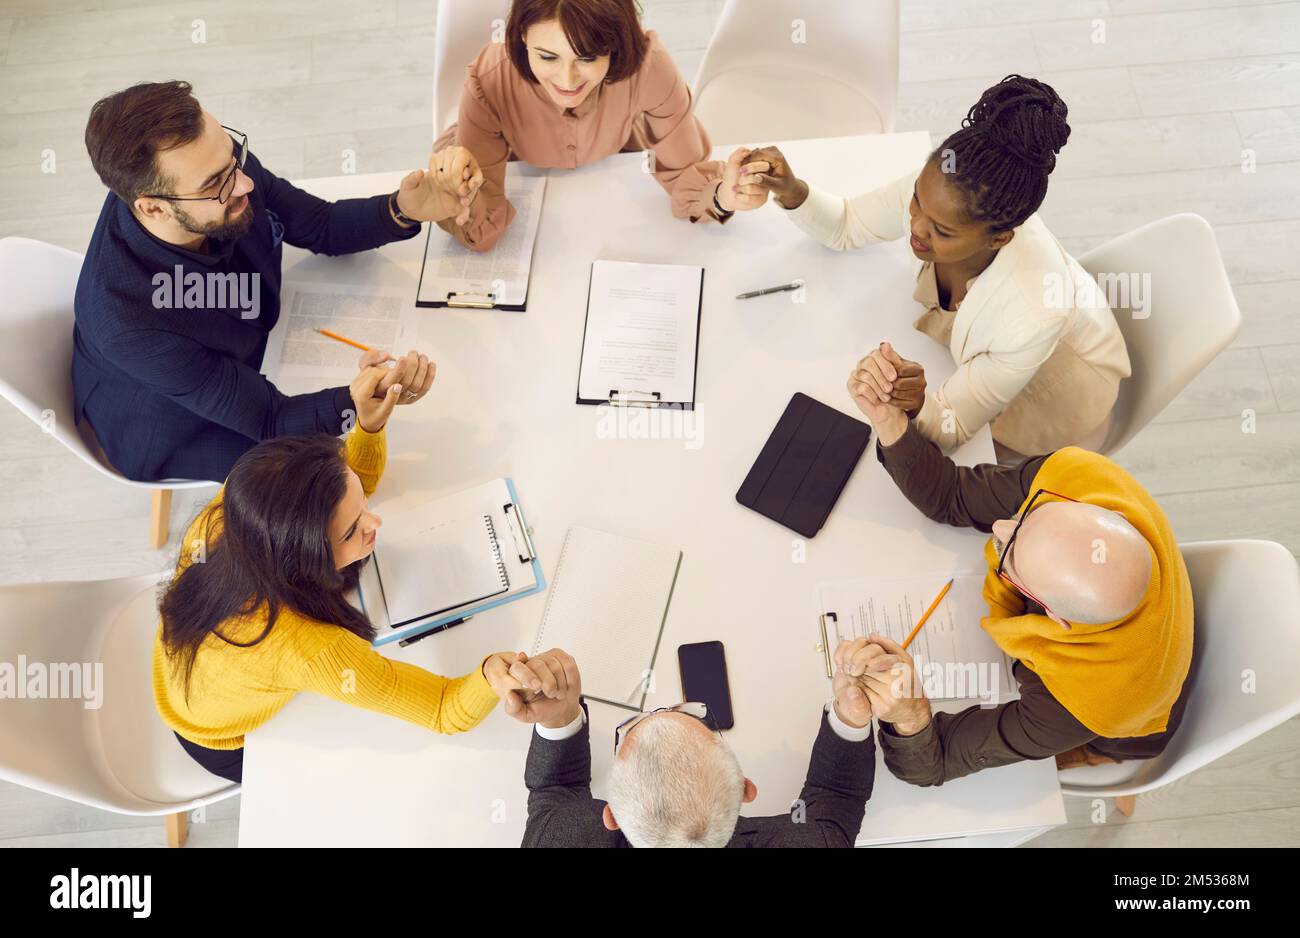 Diverse team of happy business people sitting around an office table and holding hands Stock Photo